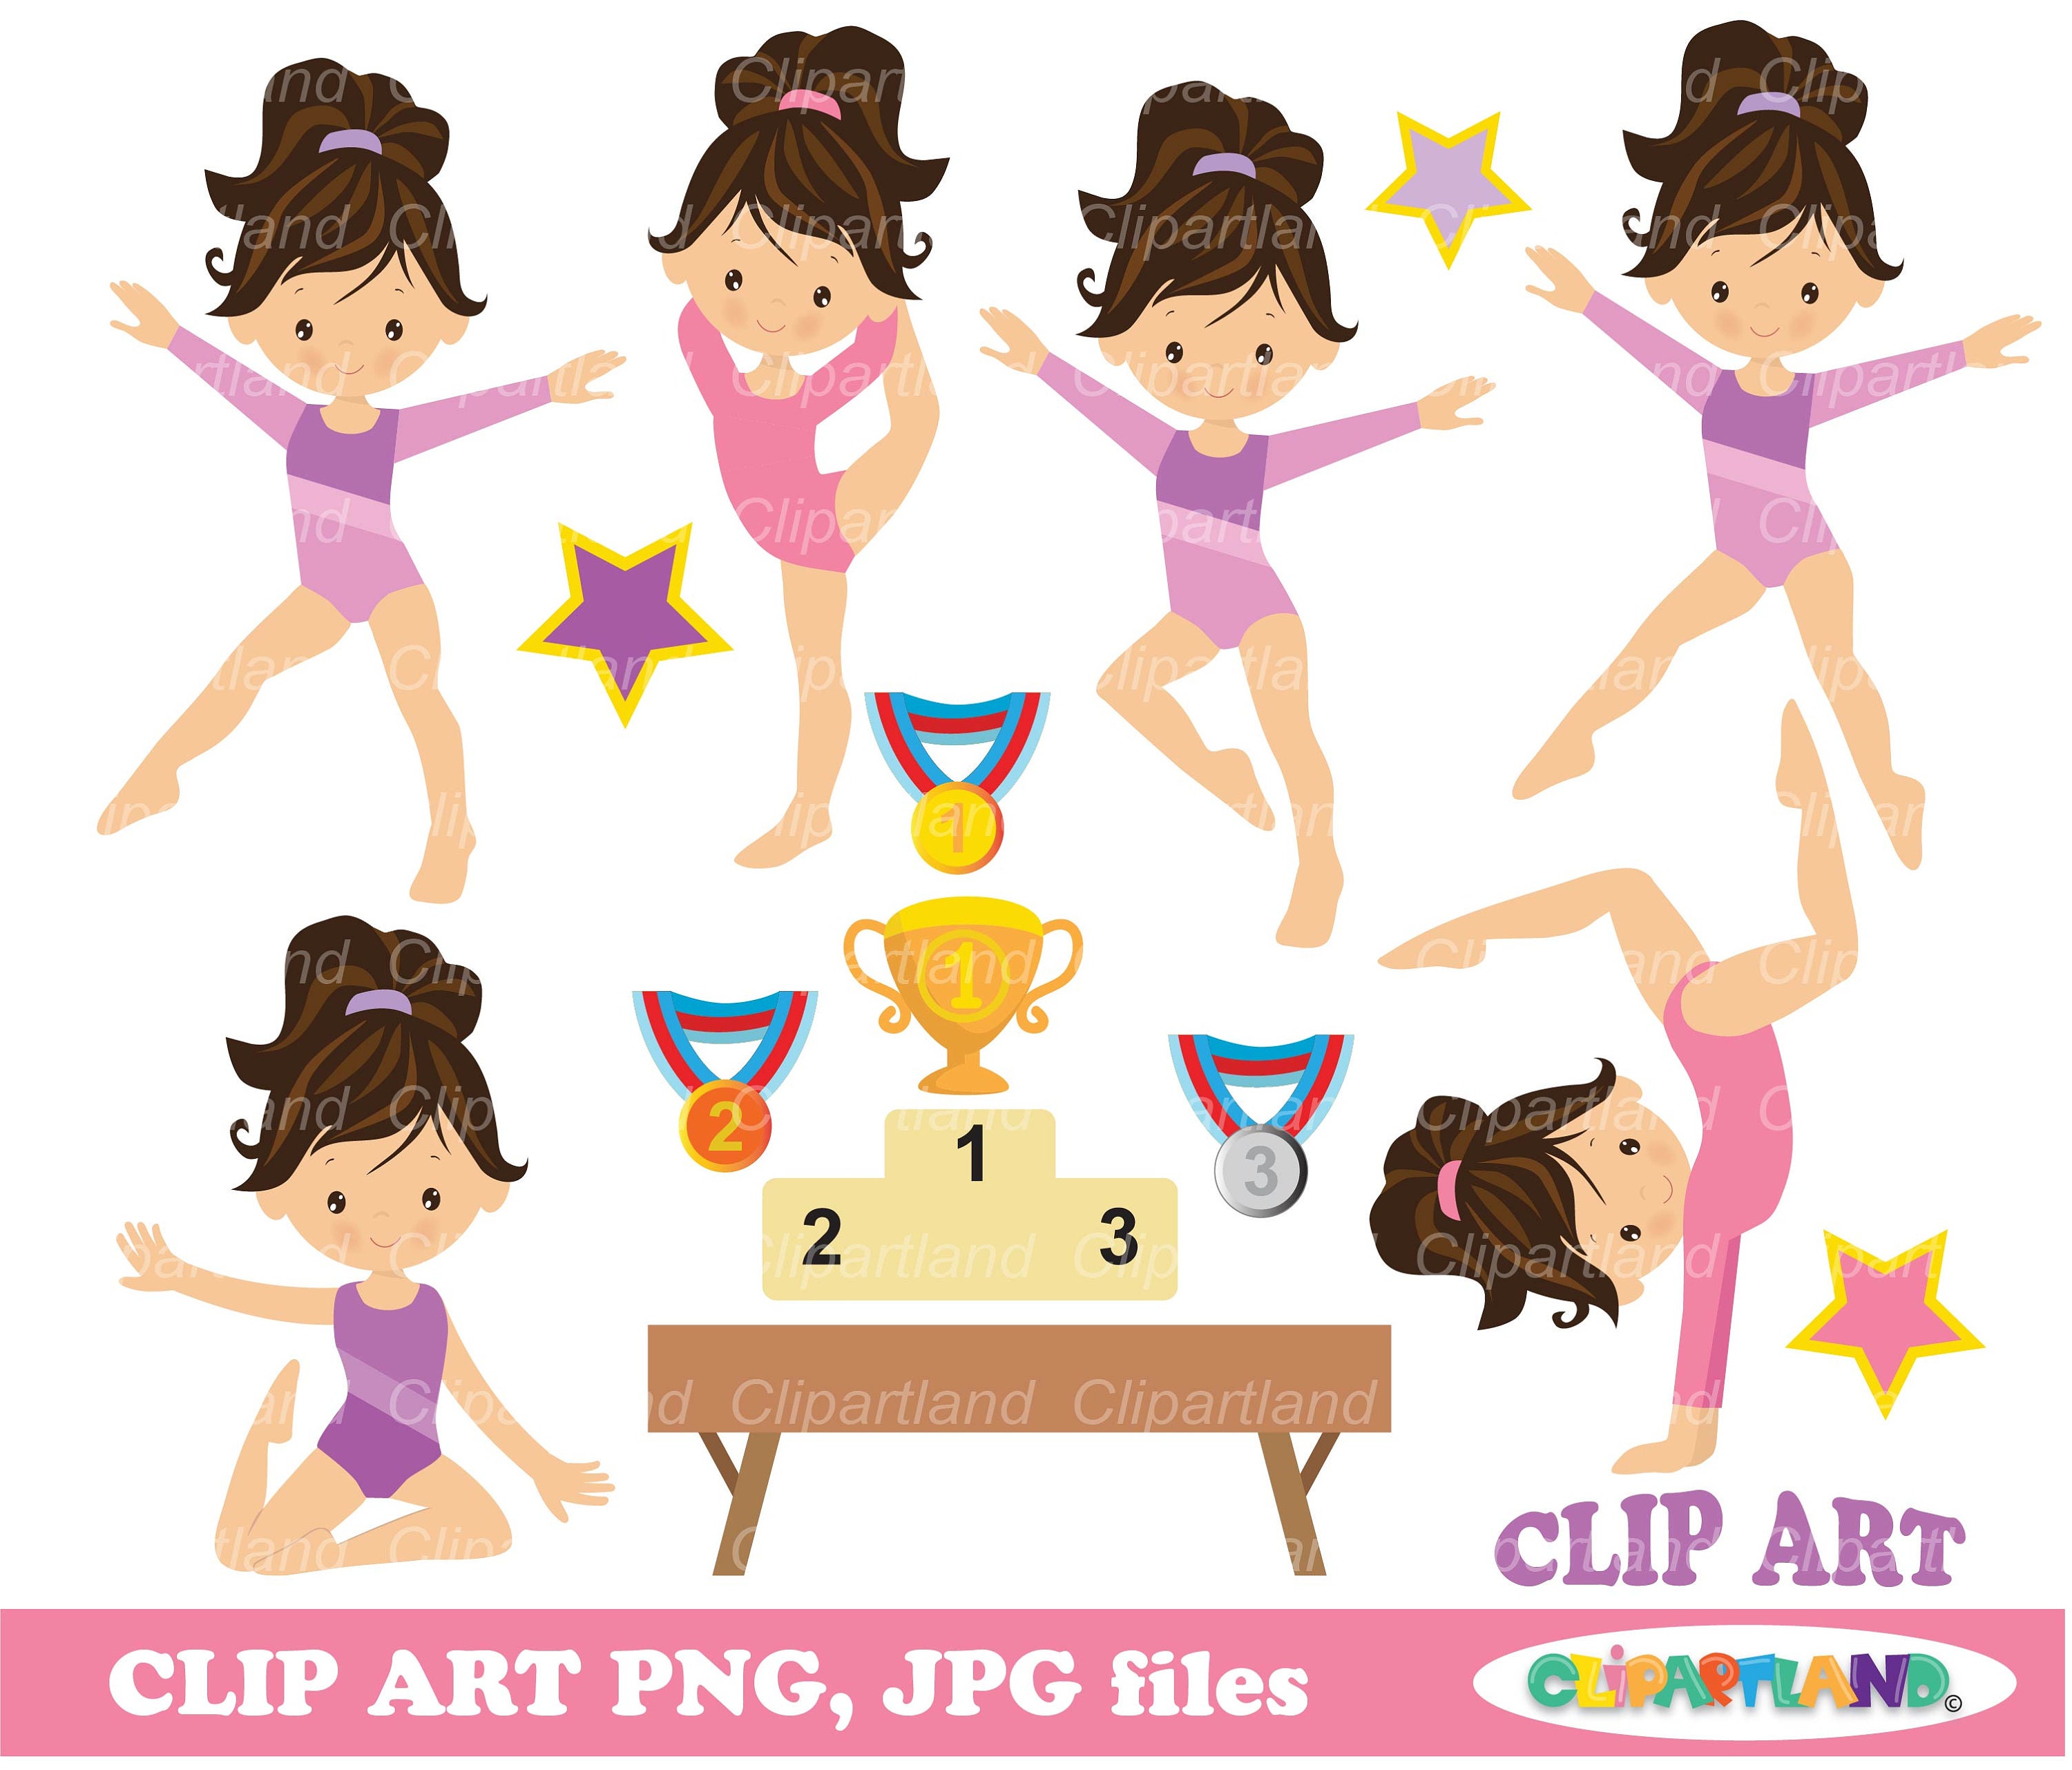 Gymnastics Gifts for Girls 5-7, Gymnastics Gifts for Girls 8-10, Gymnastics  Gifts for Girls 10-12, Teen Gifts for Girls Ages 14-16 